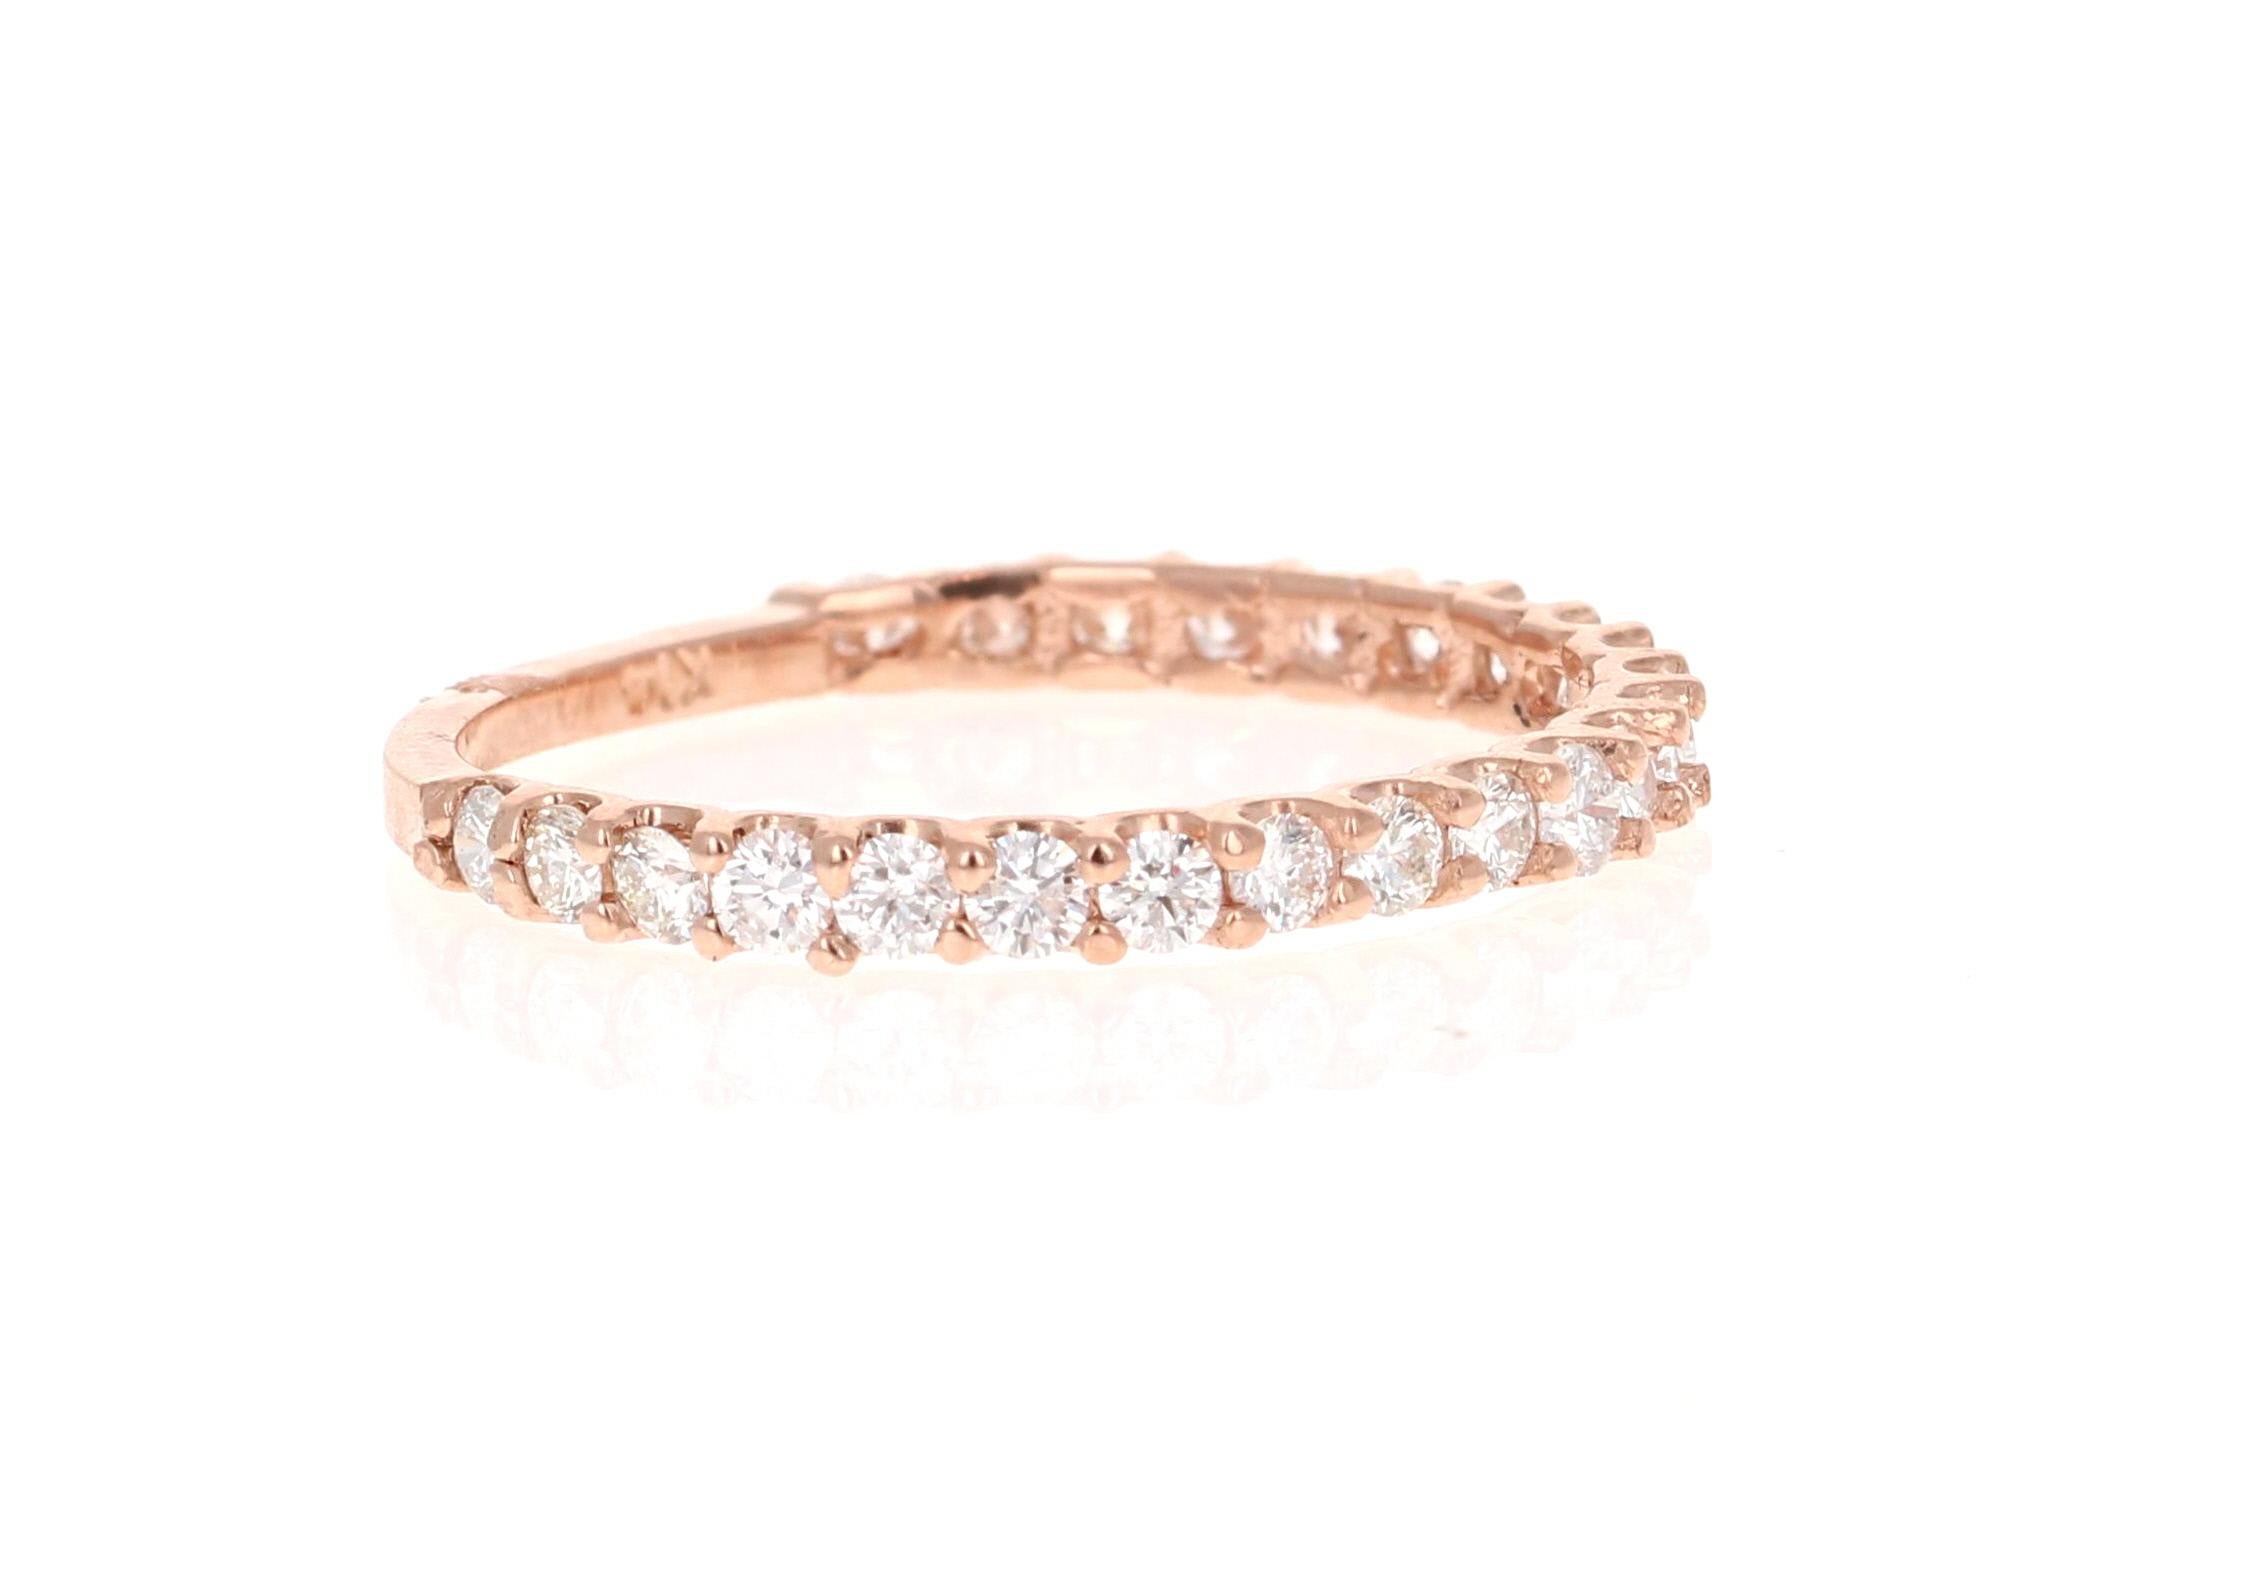 0.64 Carat Round Cut Diamond Rose Gold Band!

Cute and dainty 0.64 Carat Diamond band that is sure to be a great addition to anyone's accessory collection!   There are 23 Round Cut Diamonds that weigh 0.64 carats.  The band is made in 14K Rose Gold